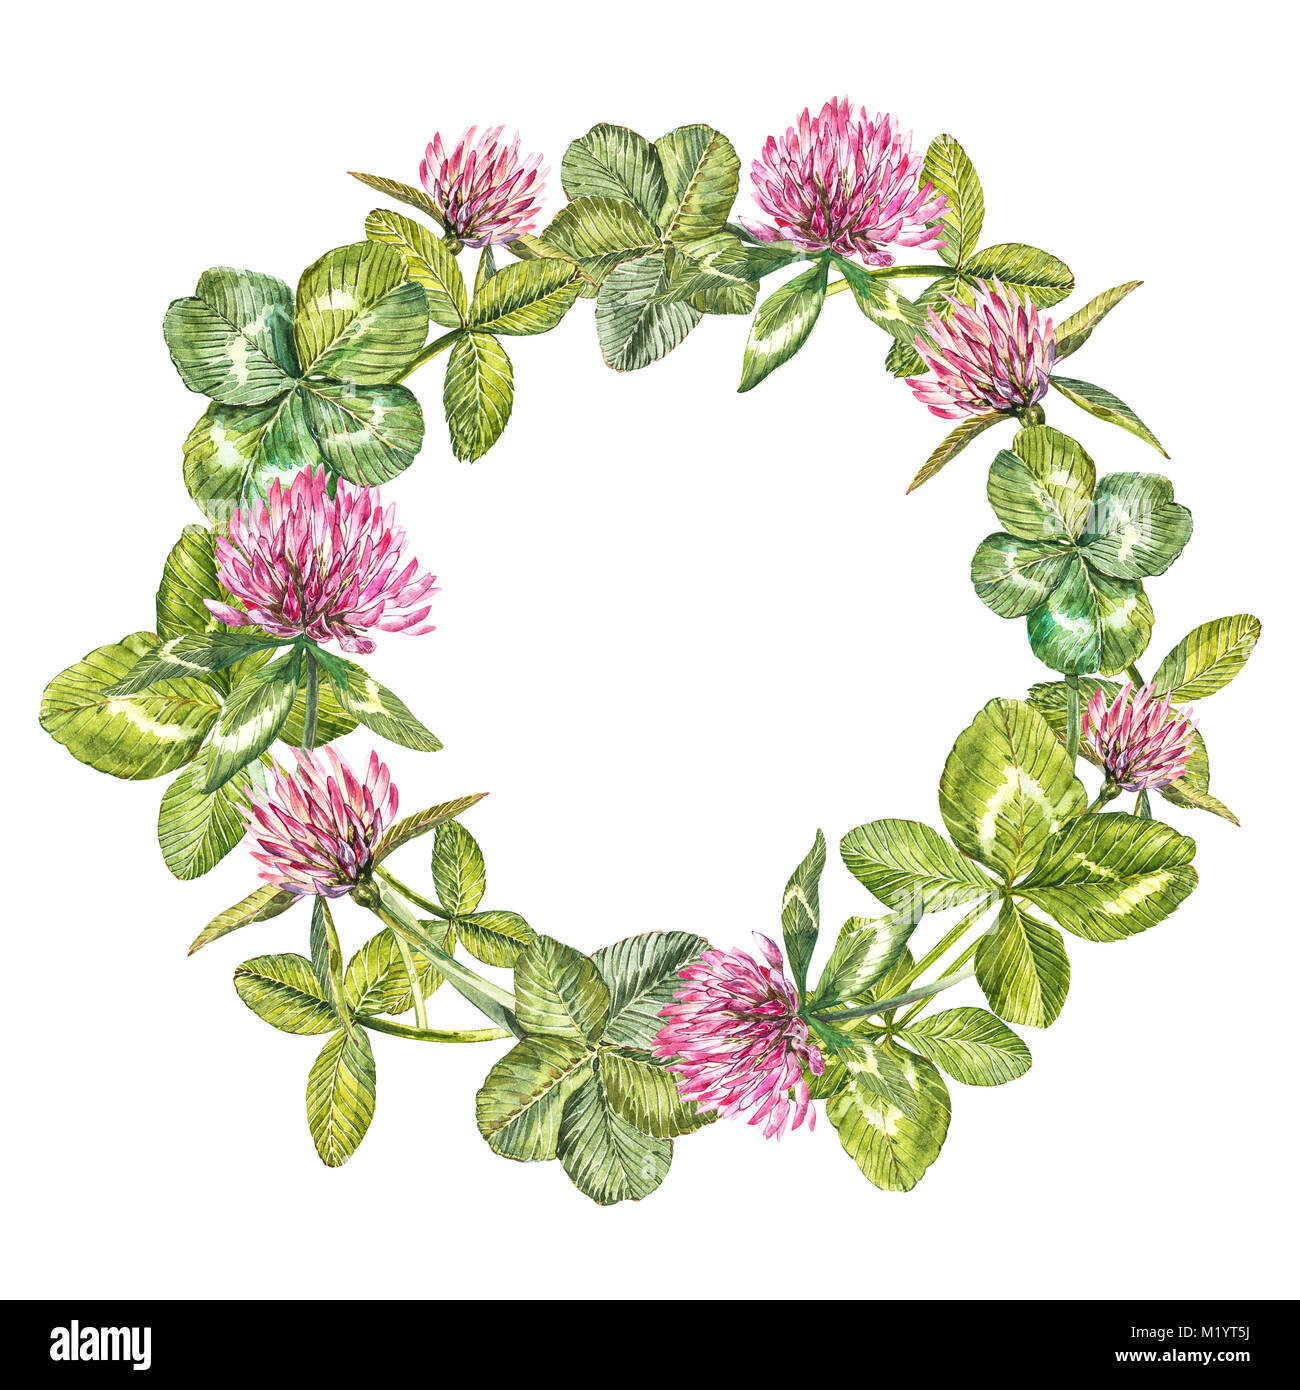 Hand-drawn watercolor wreath of flowers of red clover and leaves illustration. Painted botanical three-leaved meadow grass, isolated on white background. Happy St.Patrick 's Day card compositions. Stock Photo